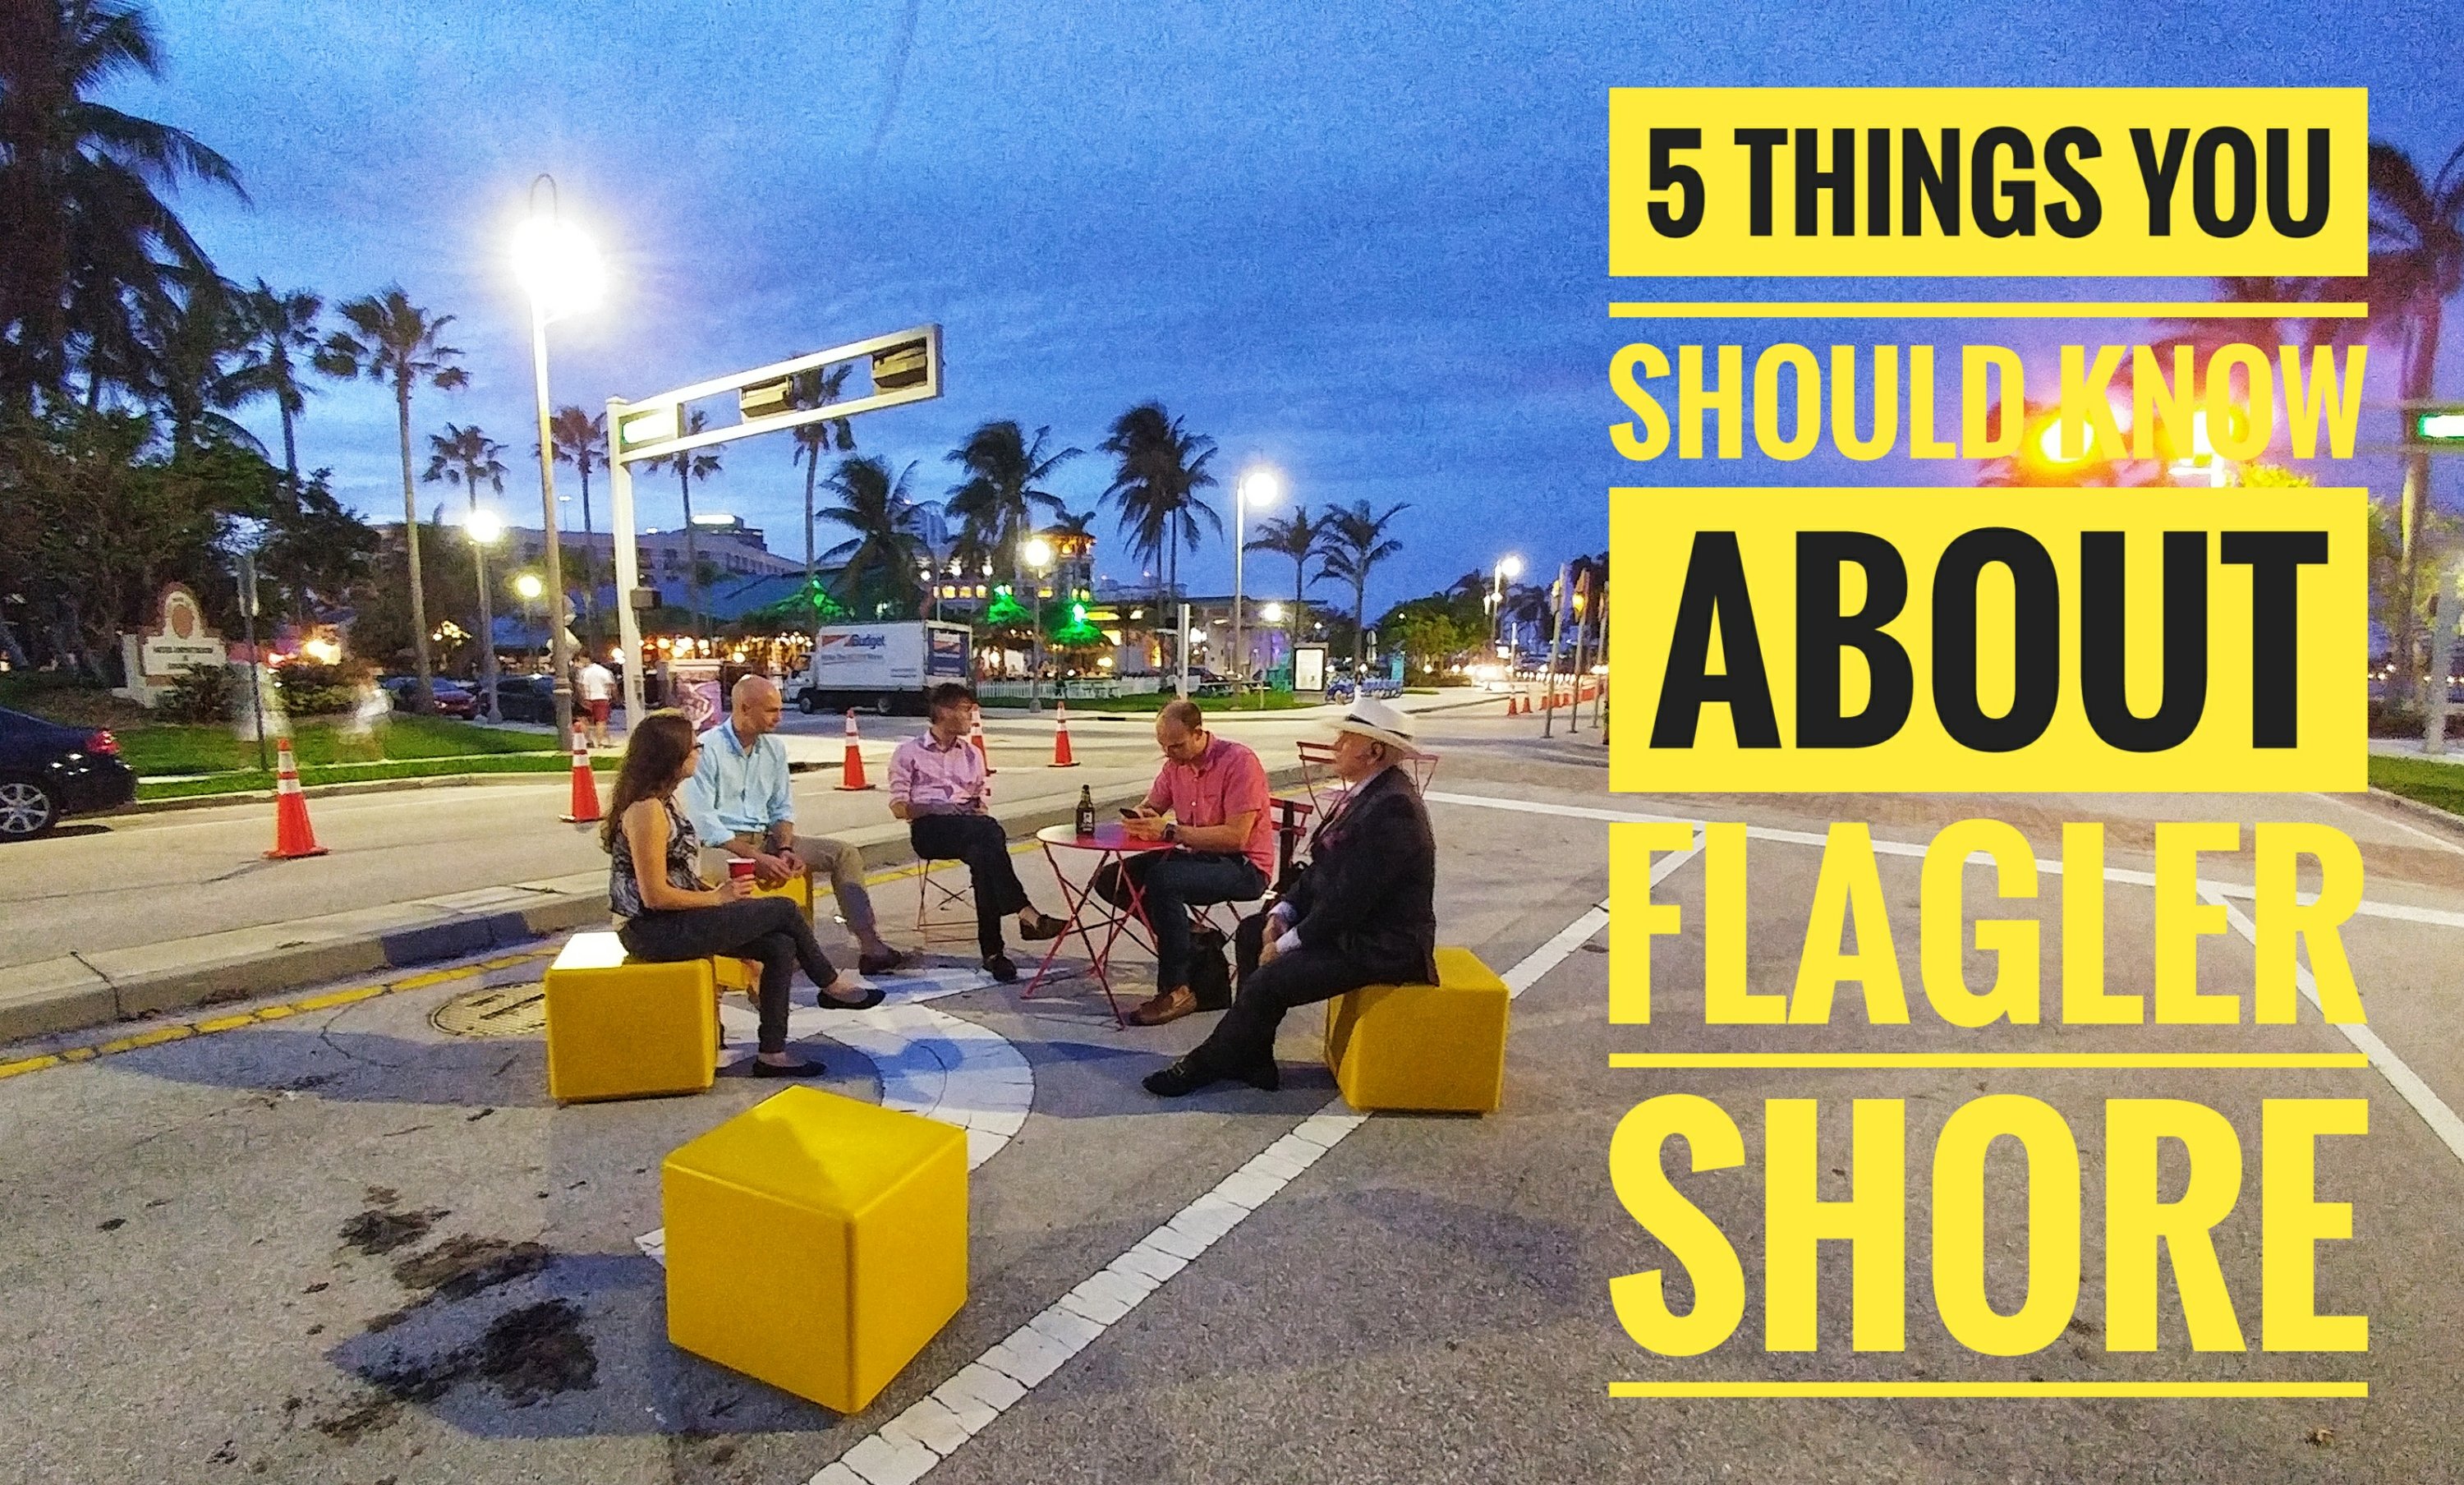 5 Things you should know about Flagler Shore